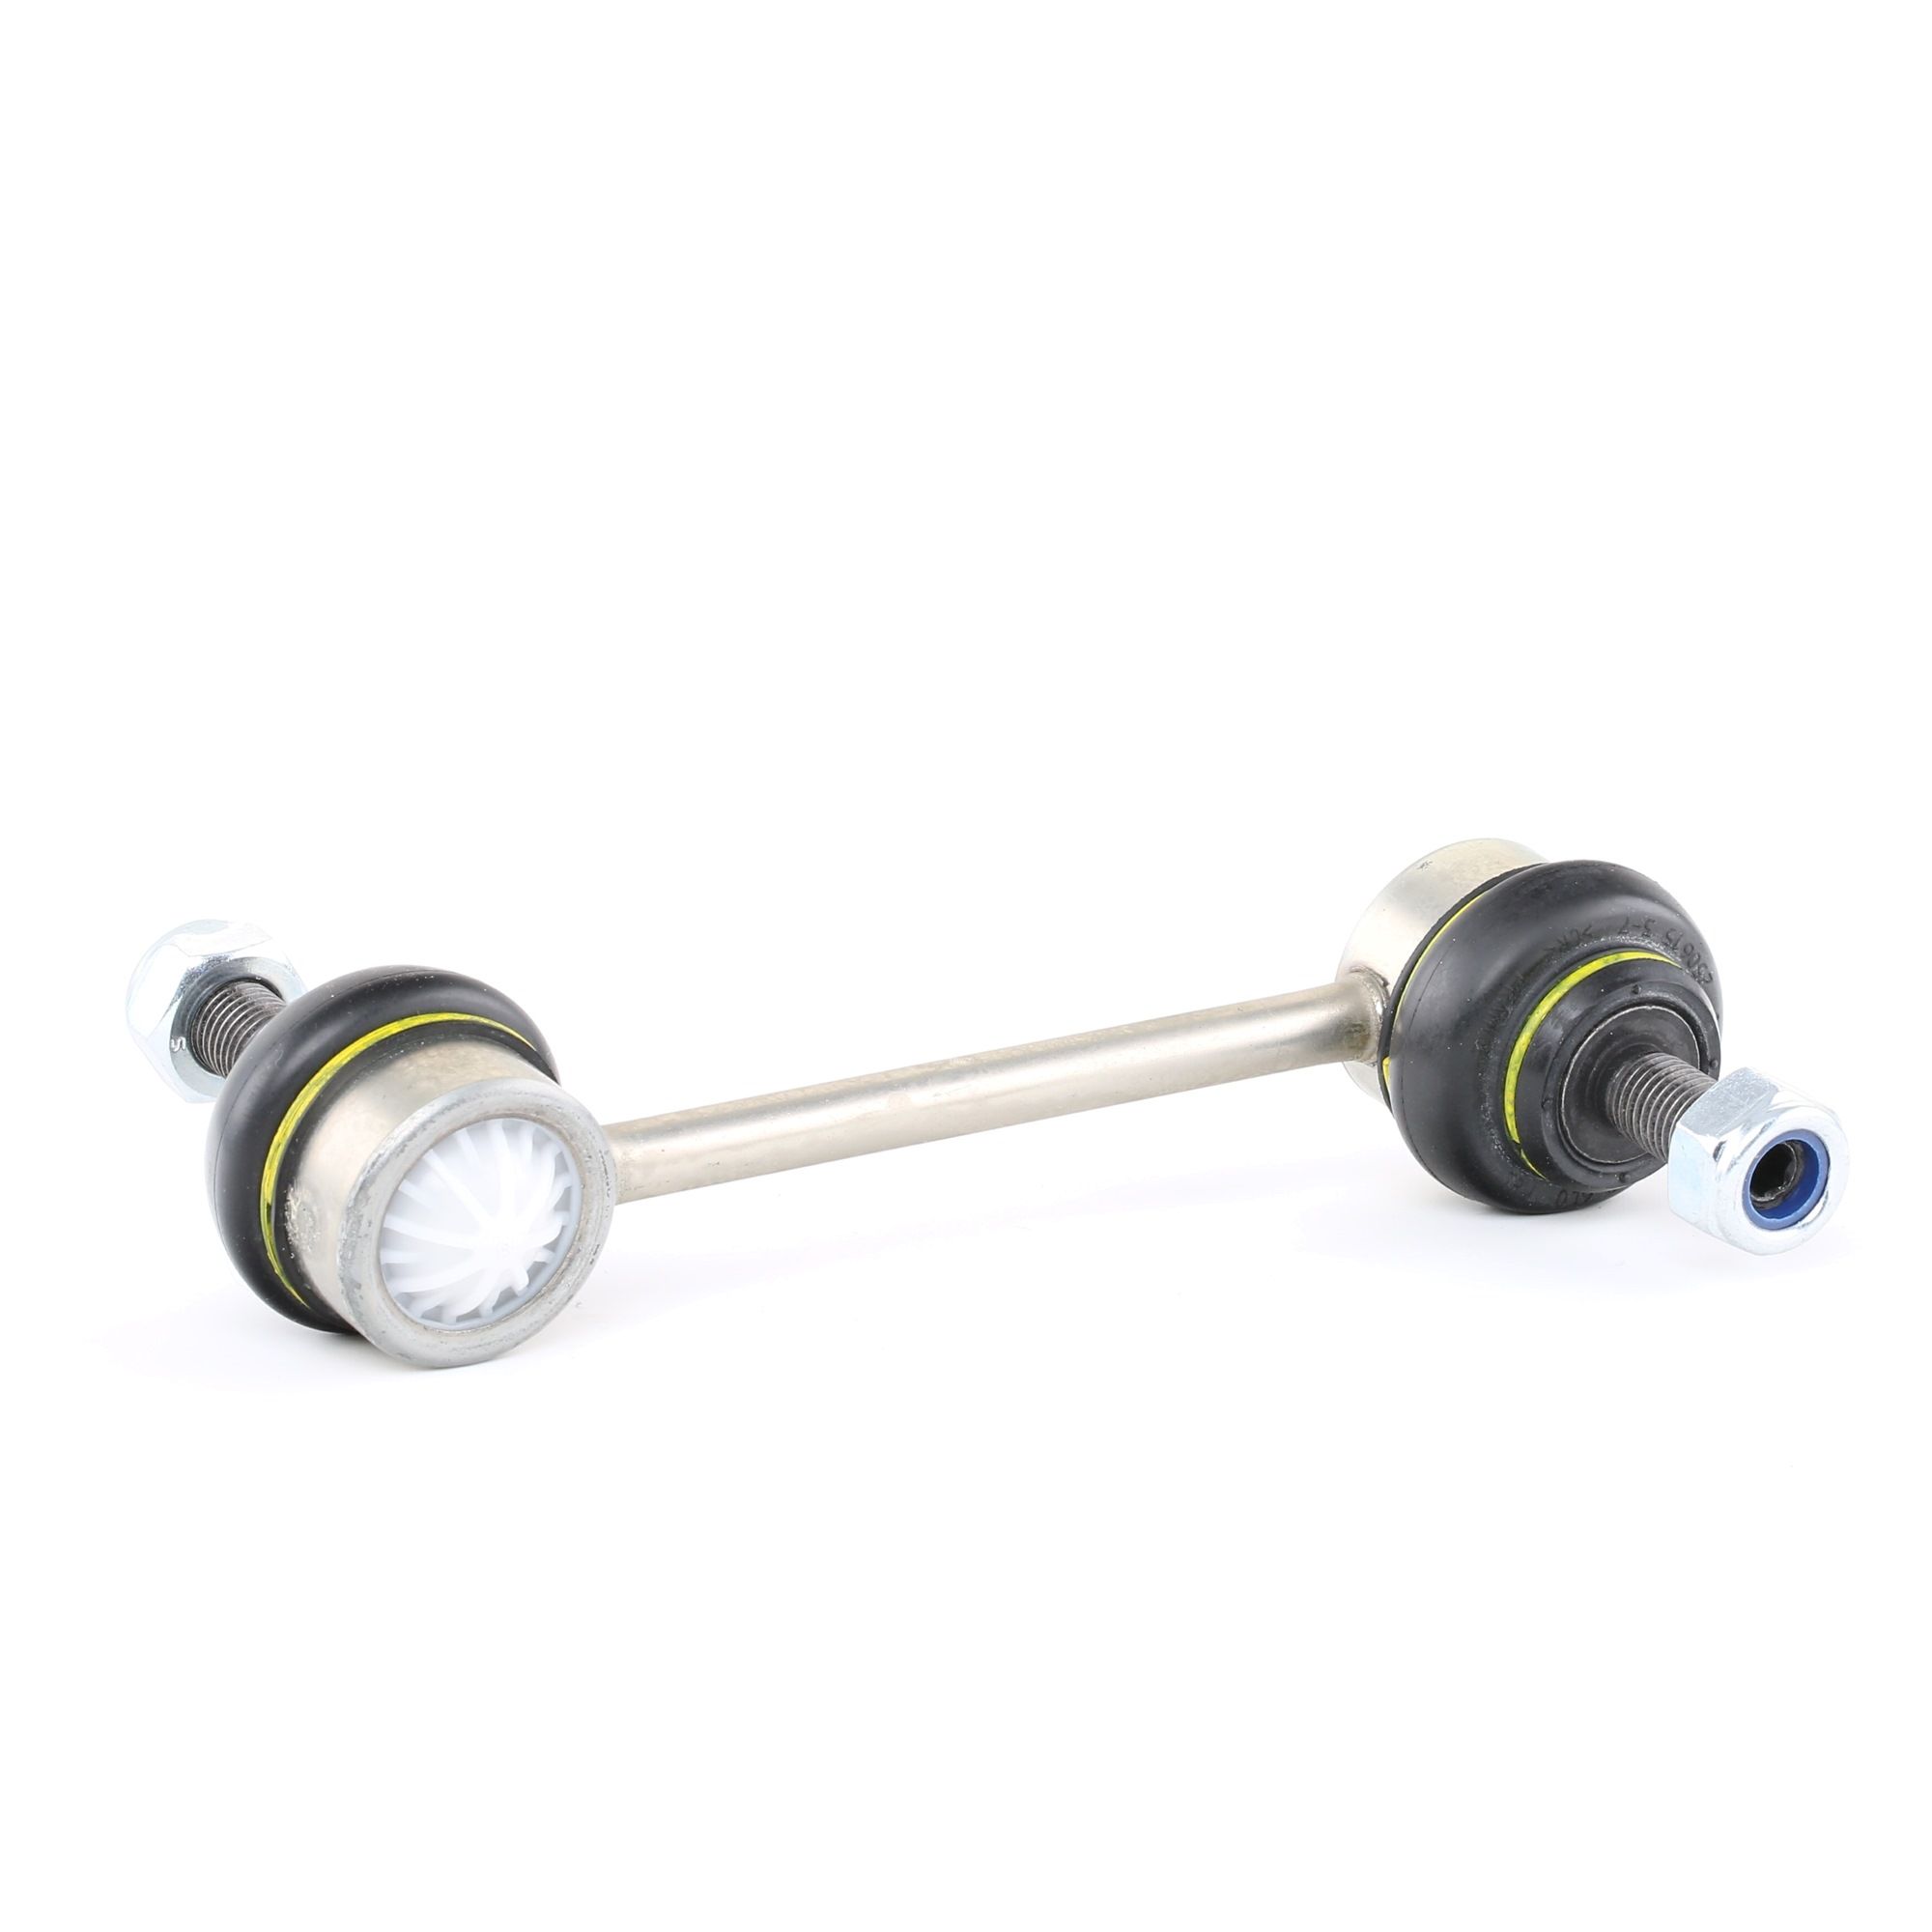 TRW JTS104 Anti-roll bar link Front Axle, both sides, 125mm, with accessories